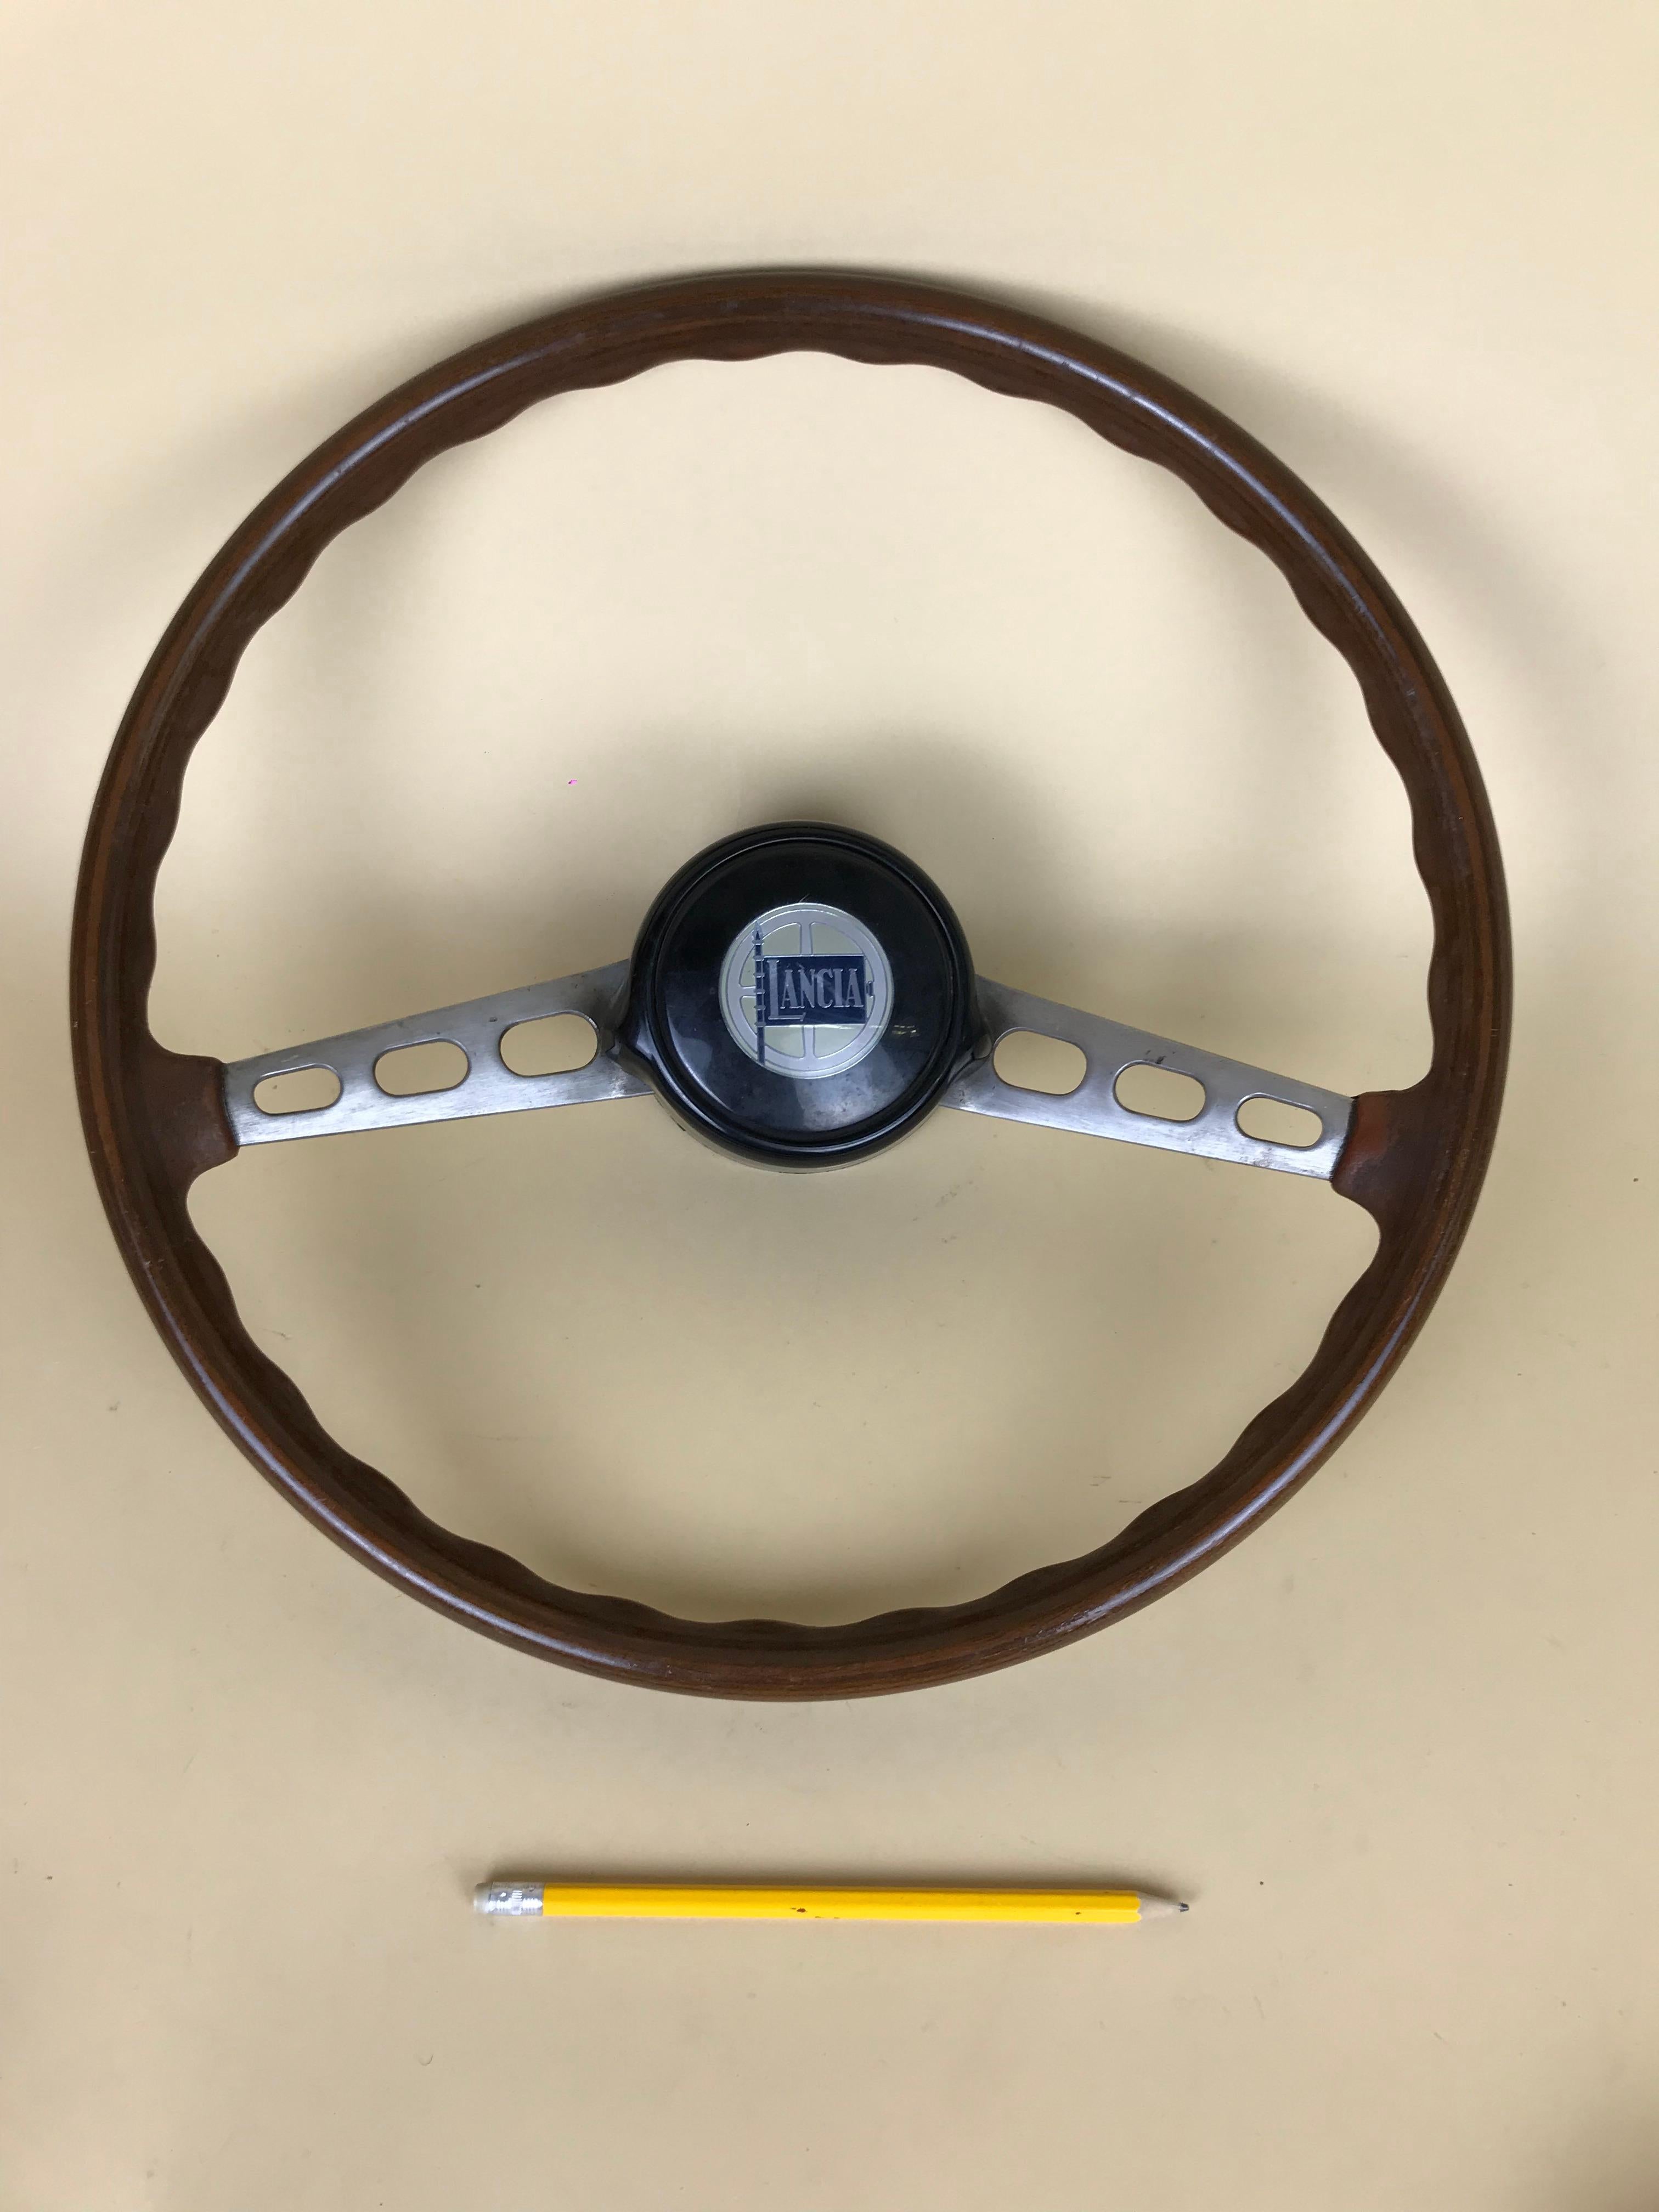 Vintage wooden and metal Lancia steering wheel Made in Italy in the 1960s.

Collector's note:

Lancia was an Italian automobile manufacturer founded in 1906 by Vincenzo Lancia as Lancia & C.. It became part of the Fiat Group in 1969; the current